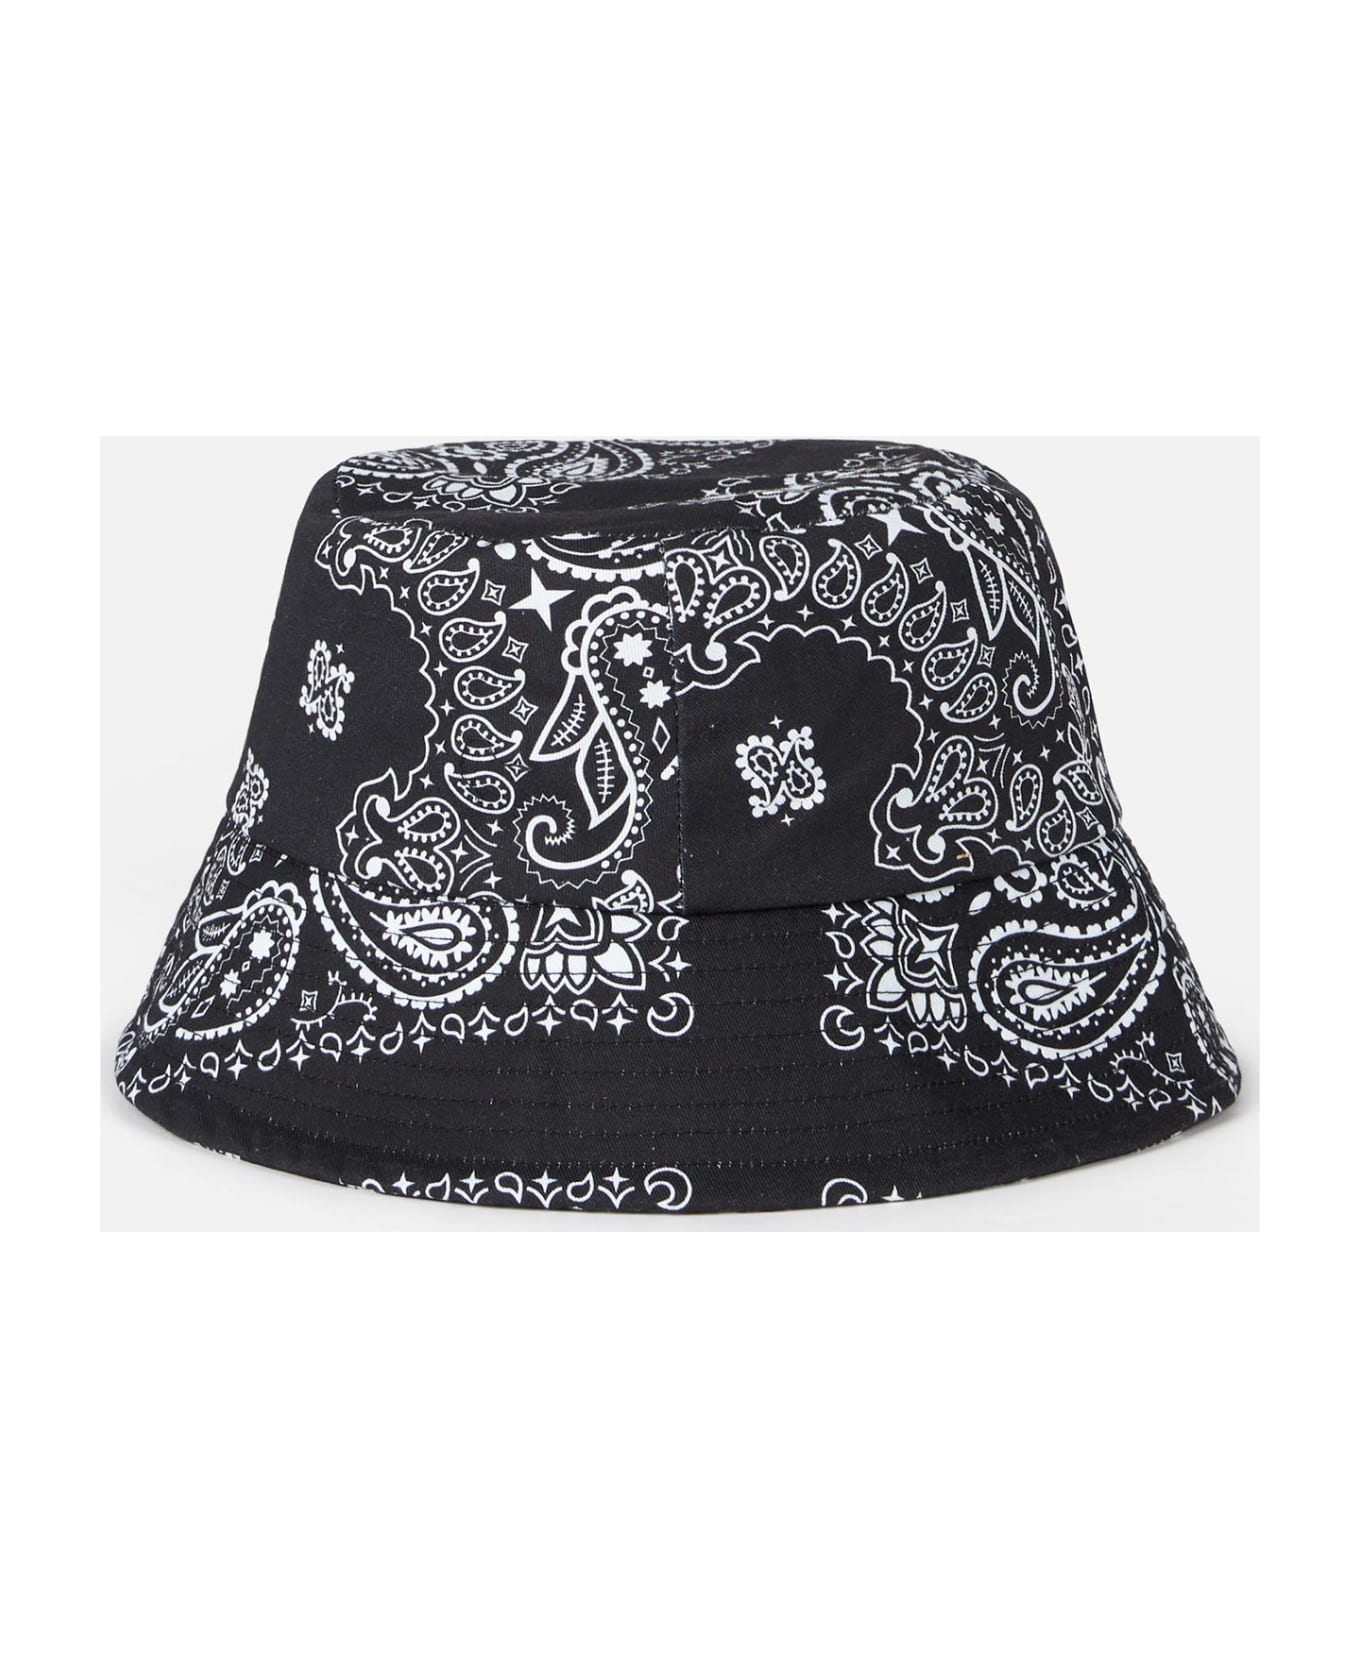 MC2 Saint Barth Cotton Bucket Hat With Front Embroidery And Bandanna Pattern - BLACK